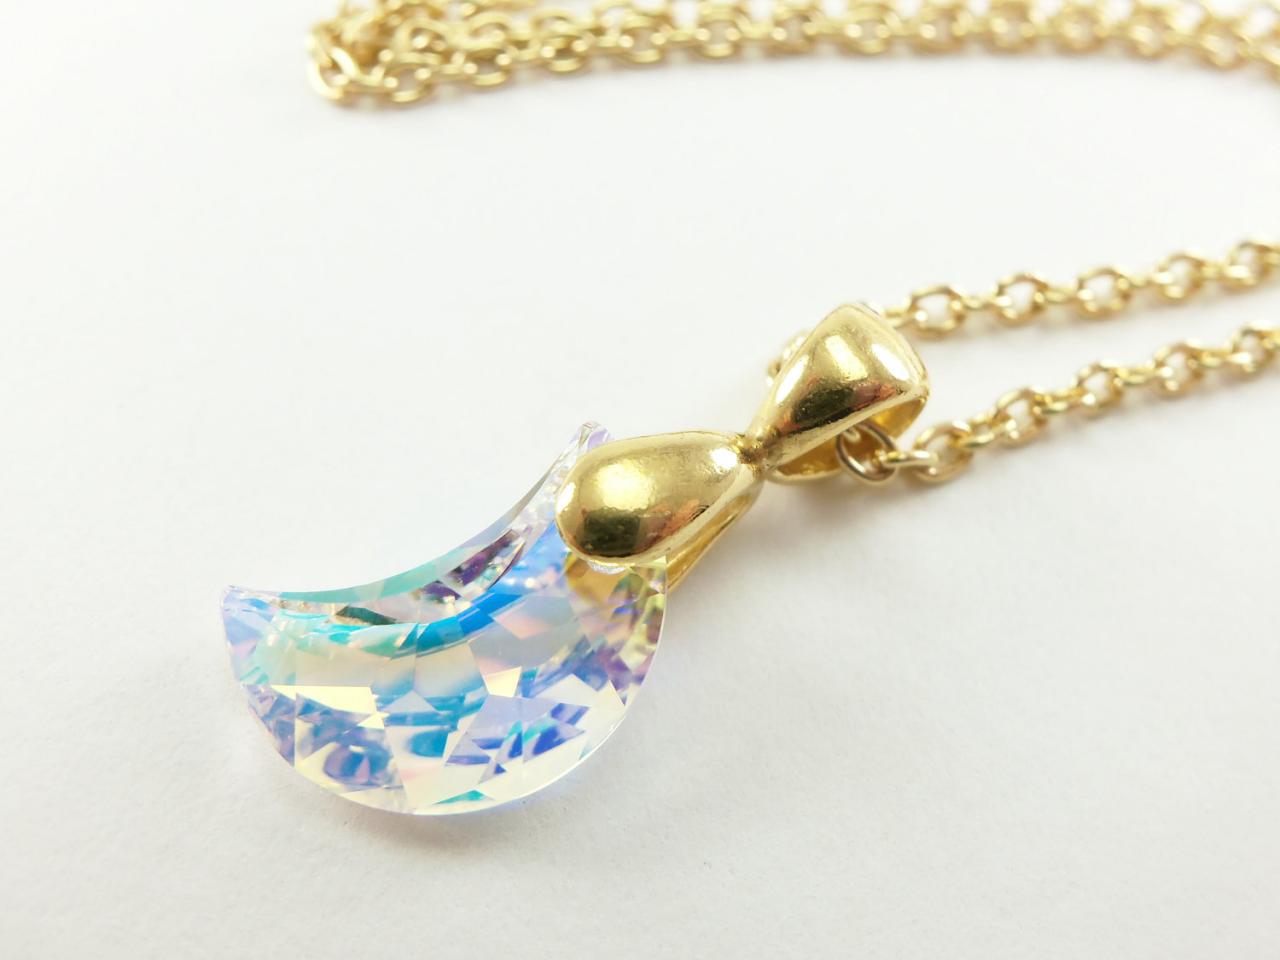 Moon Necklace Gold Jewelry Celestial Necklace Clear Moon Galaxy Gold Necklace Crystal Metal